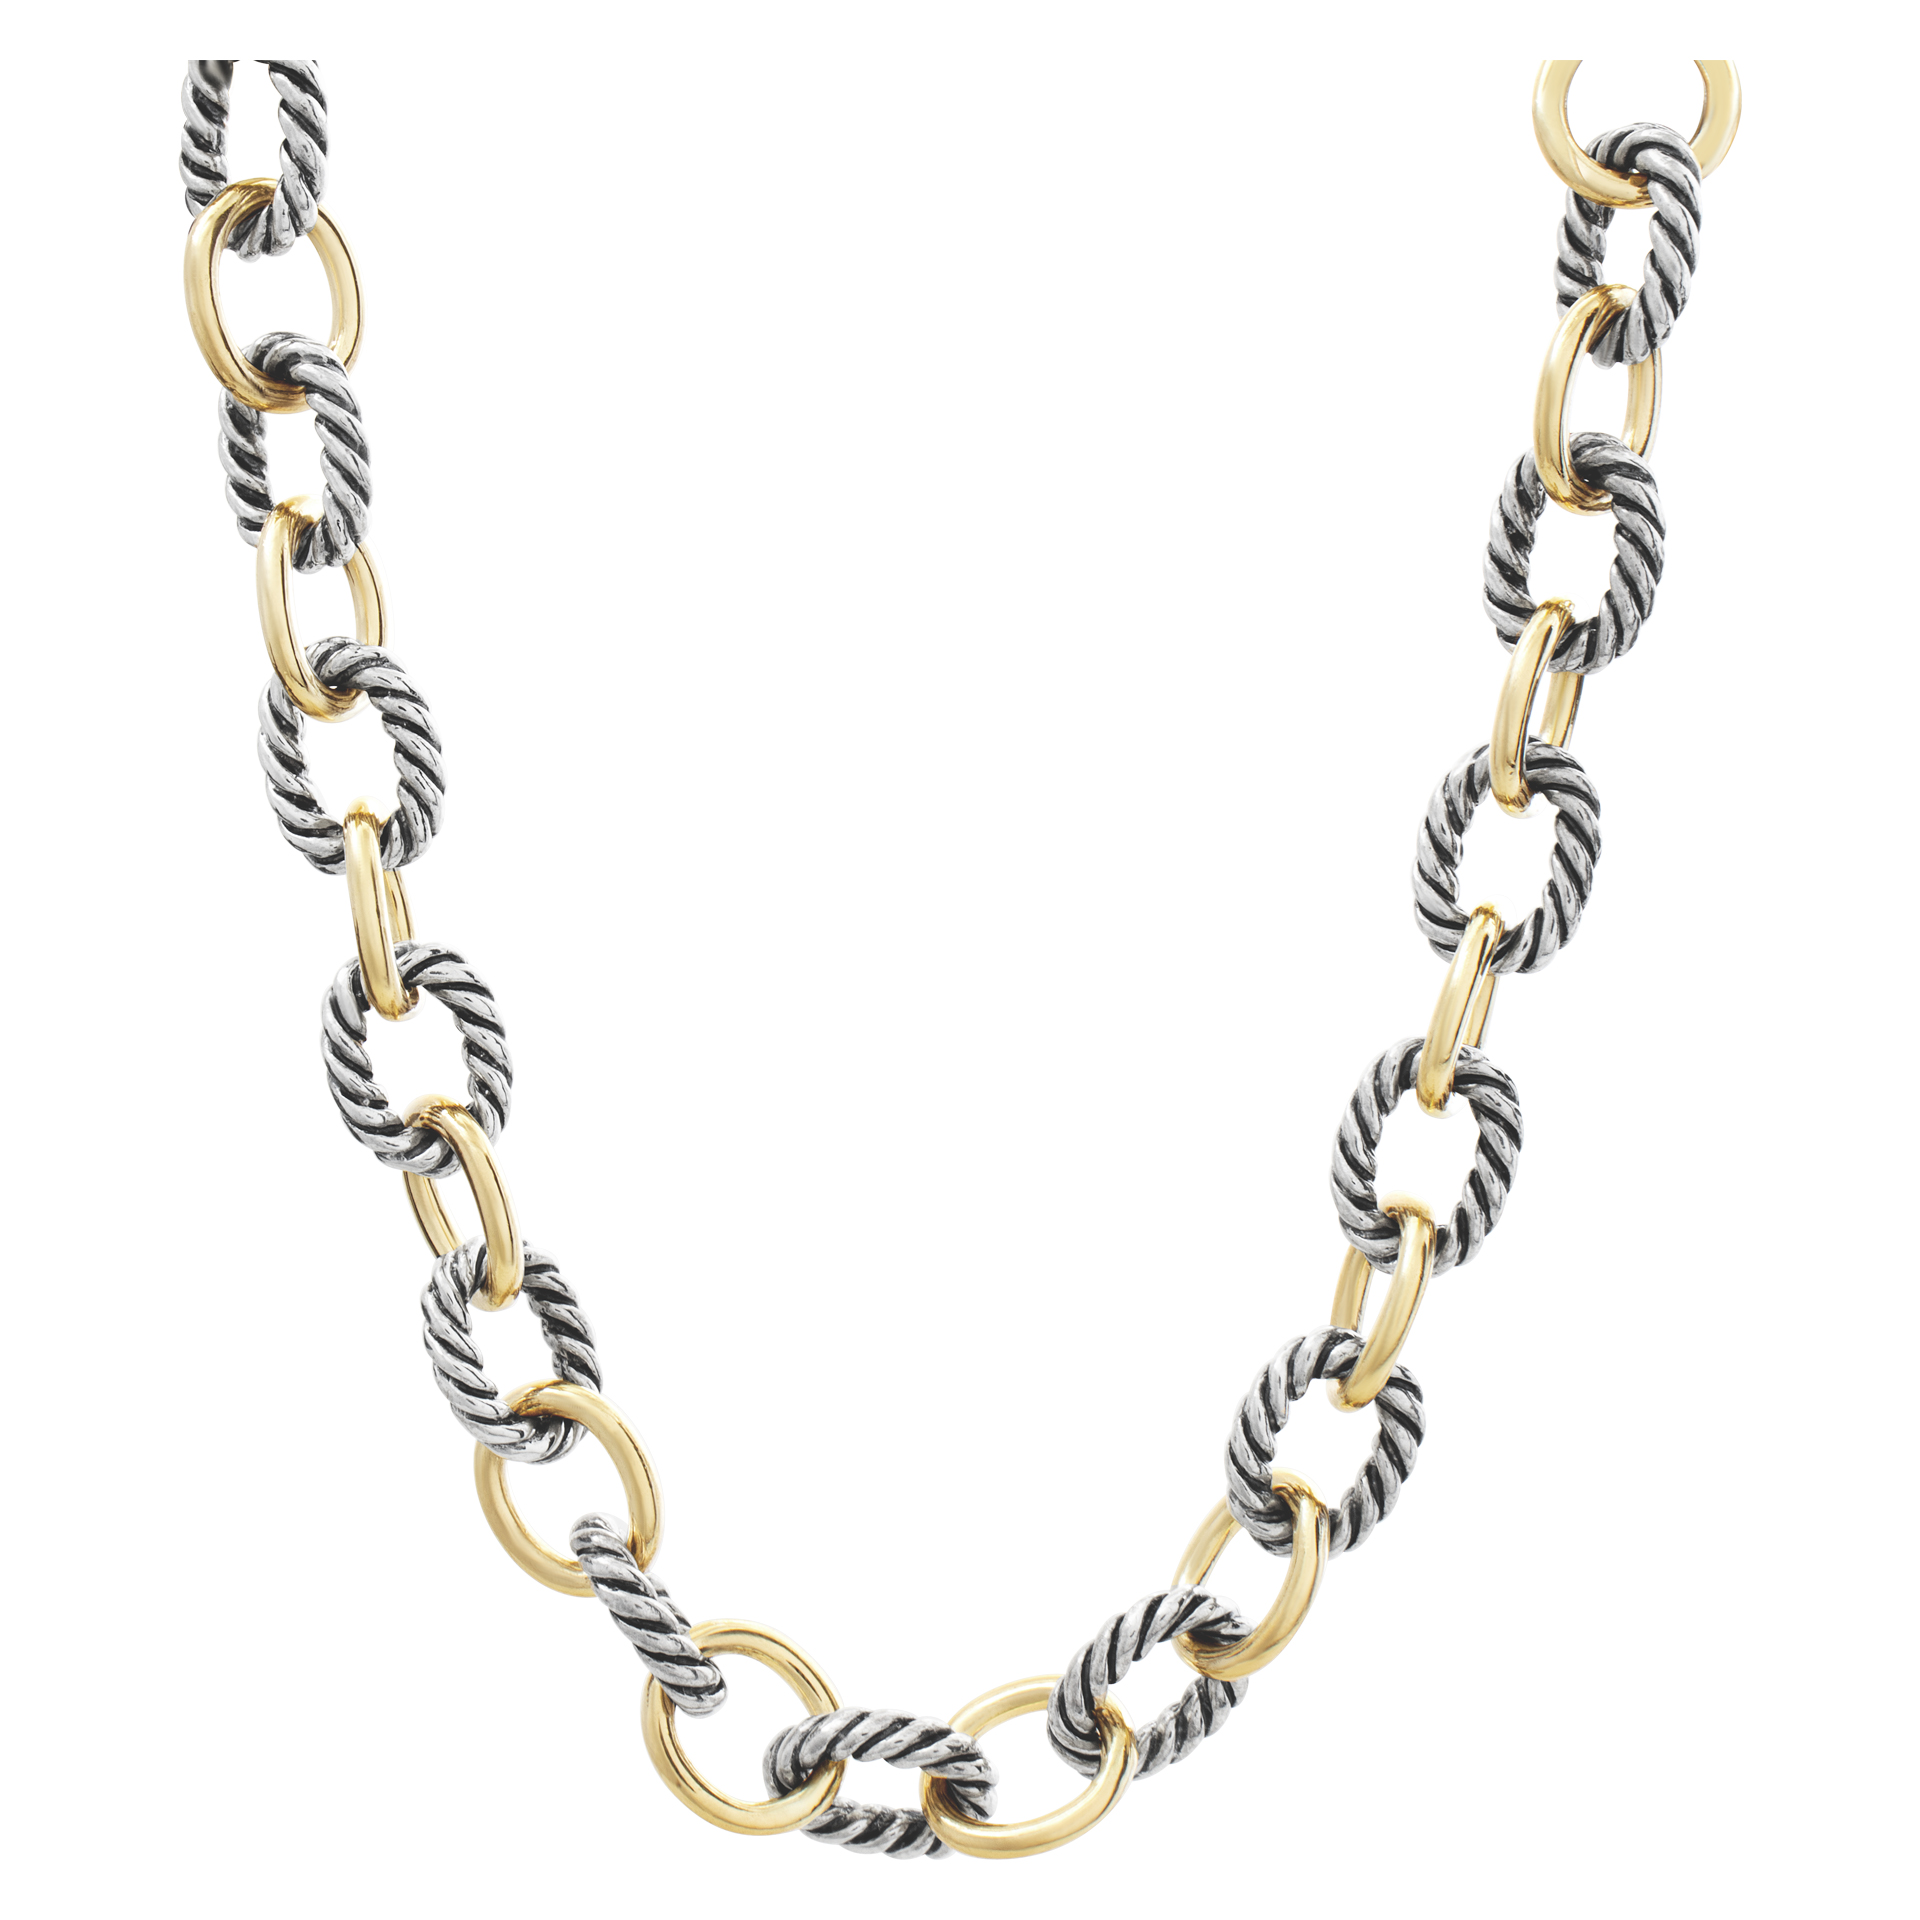 David Yurman 18k And Sterling Silver Link Necklace image 1